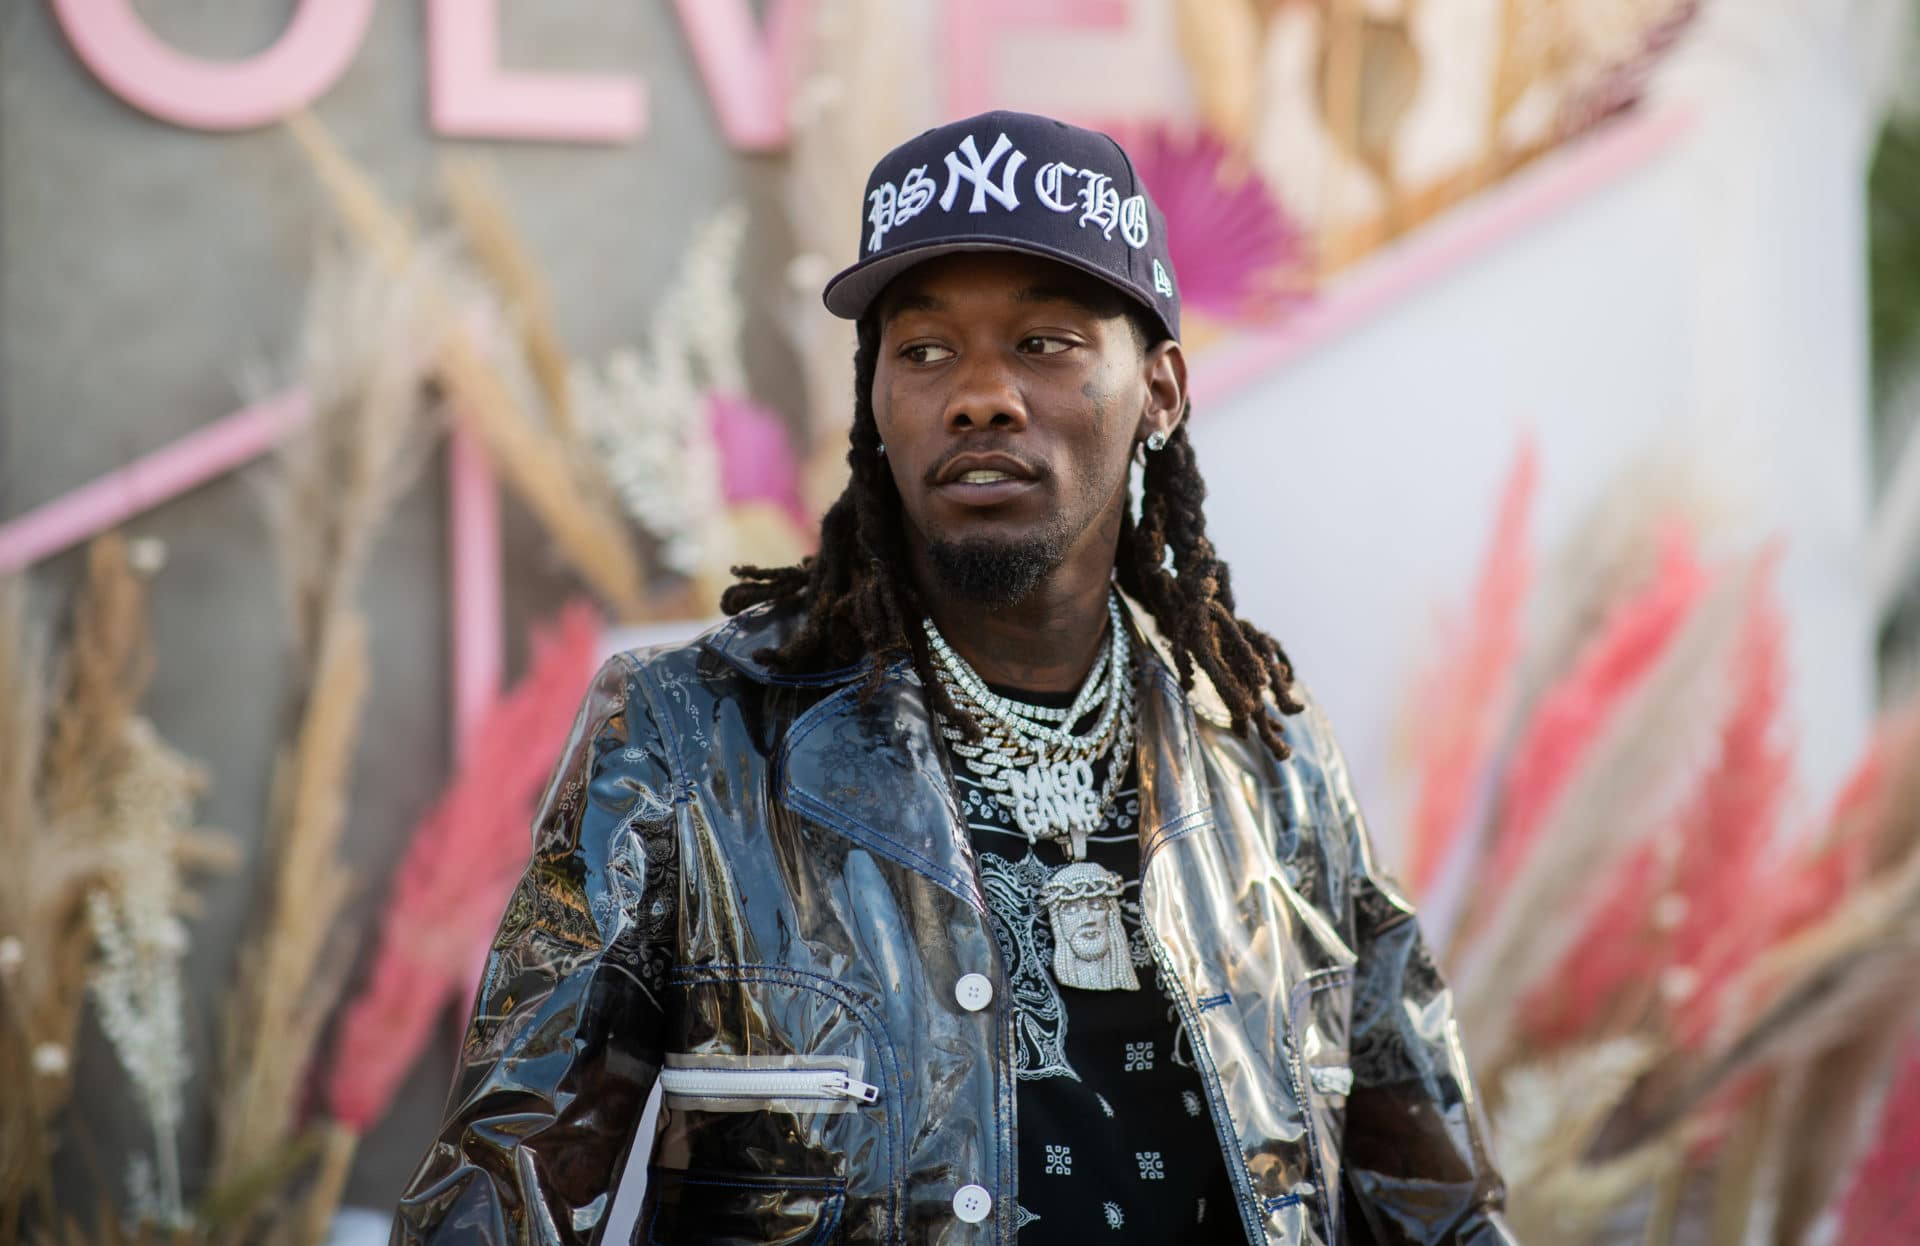 Offset Hit With Three Felony Charges After Traffic Incident: Report